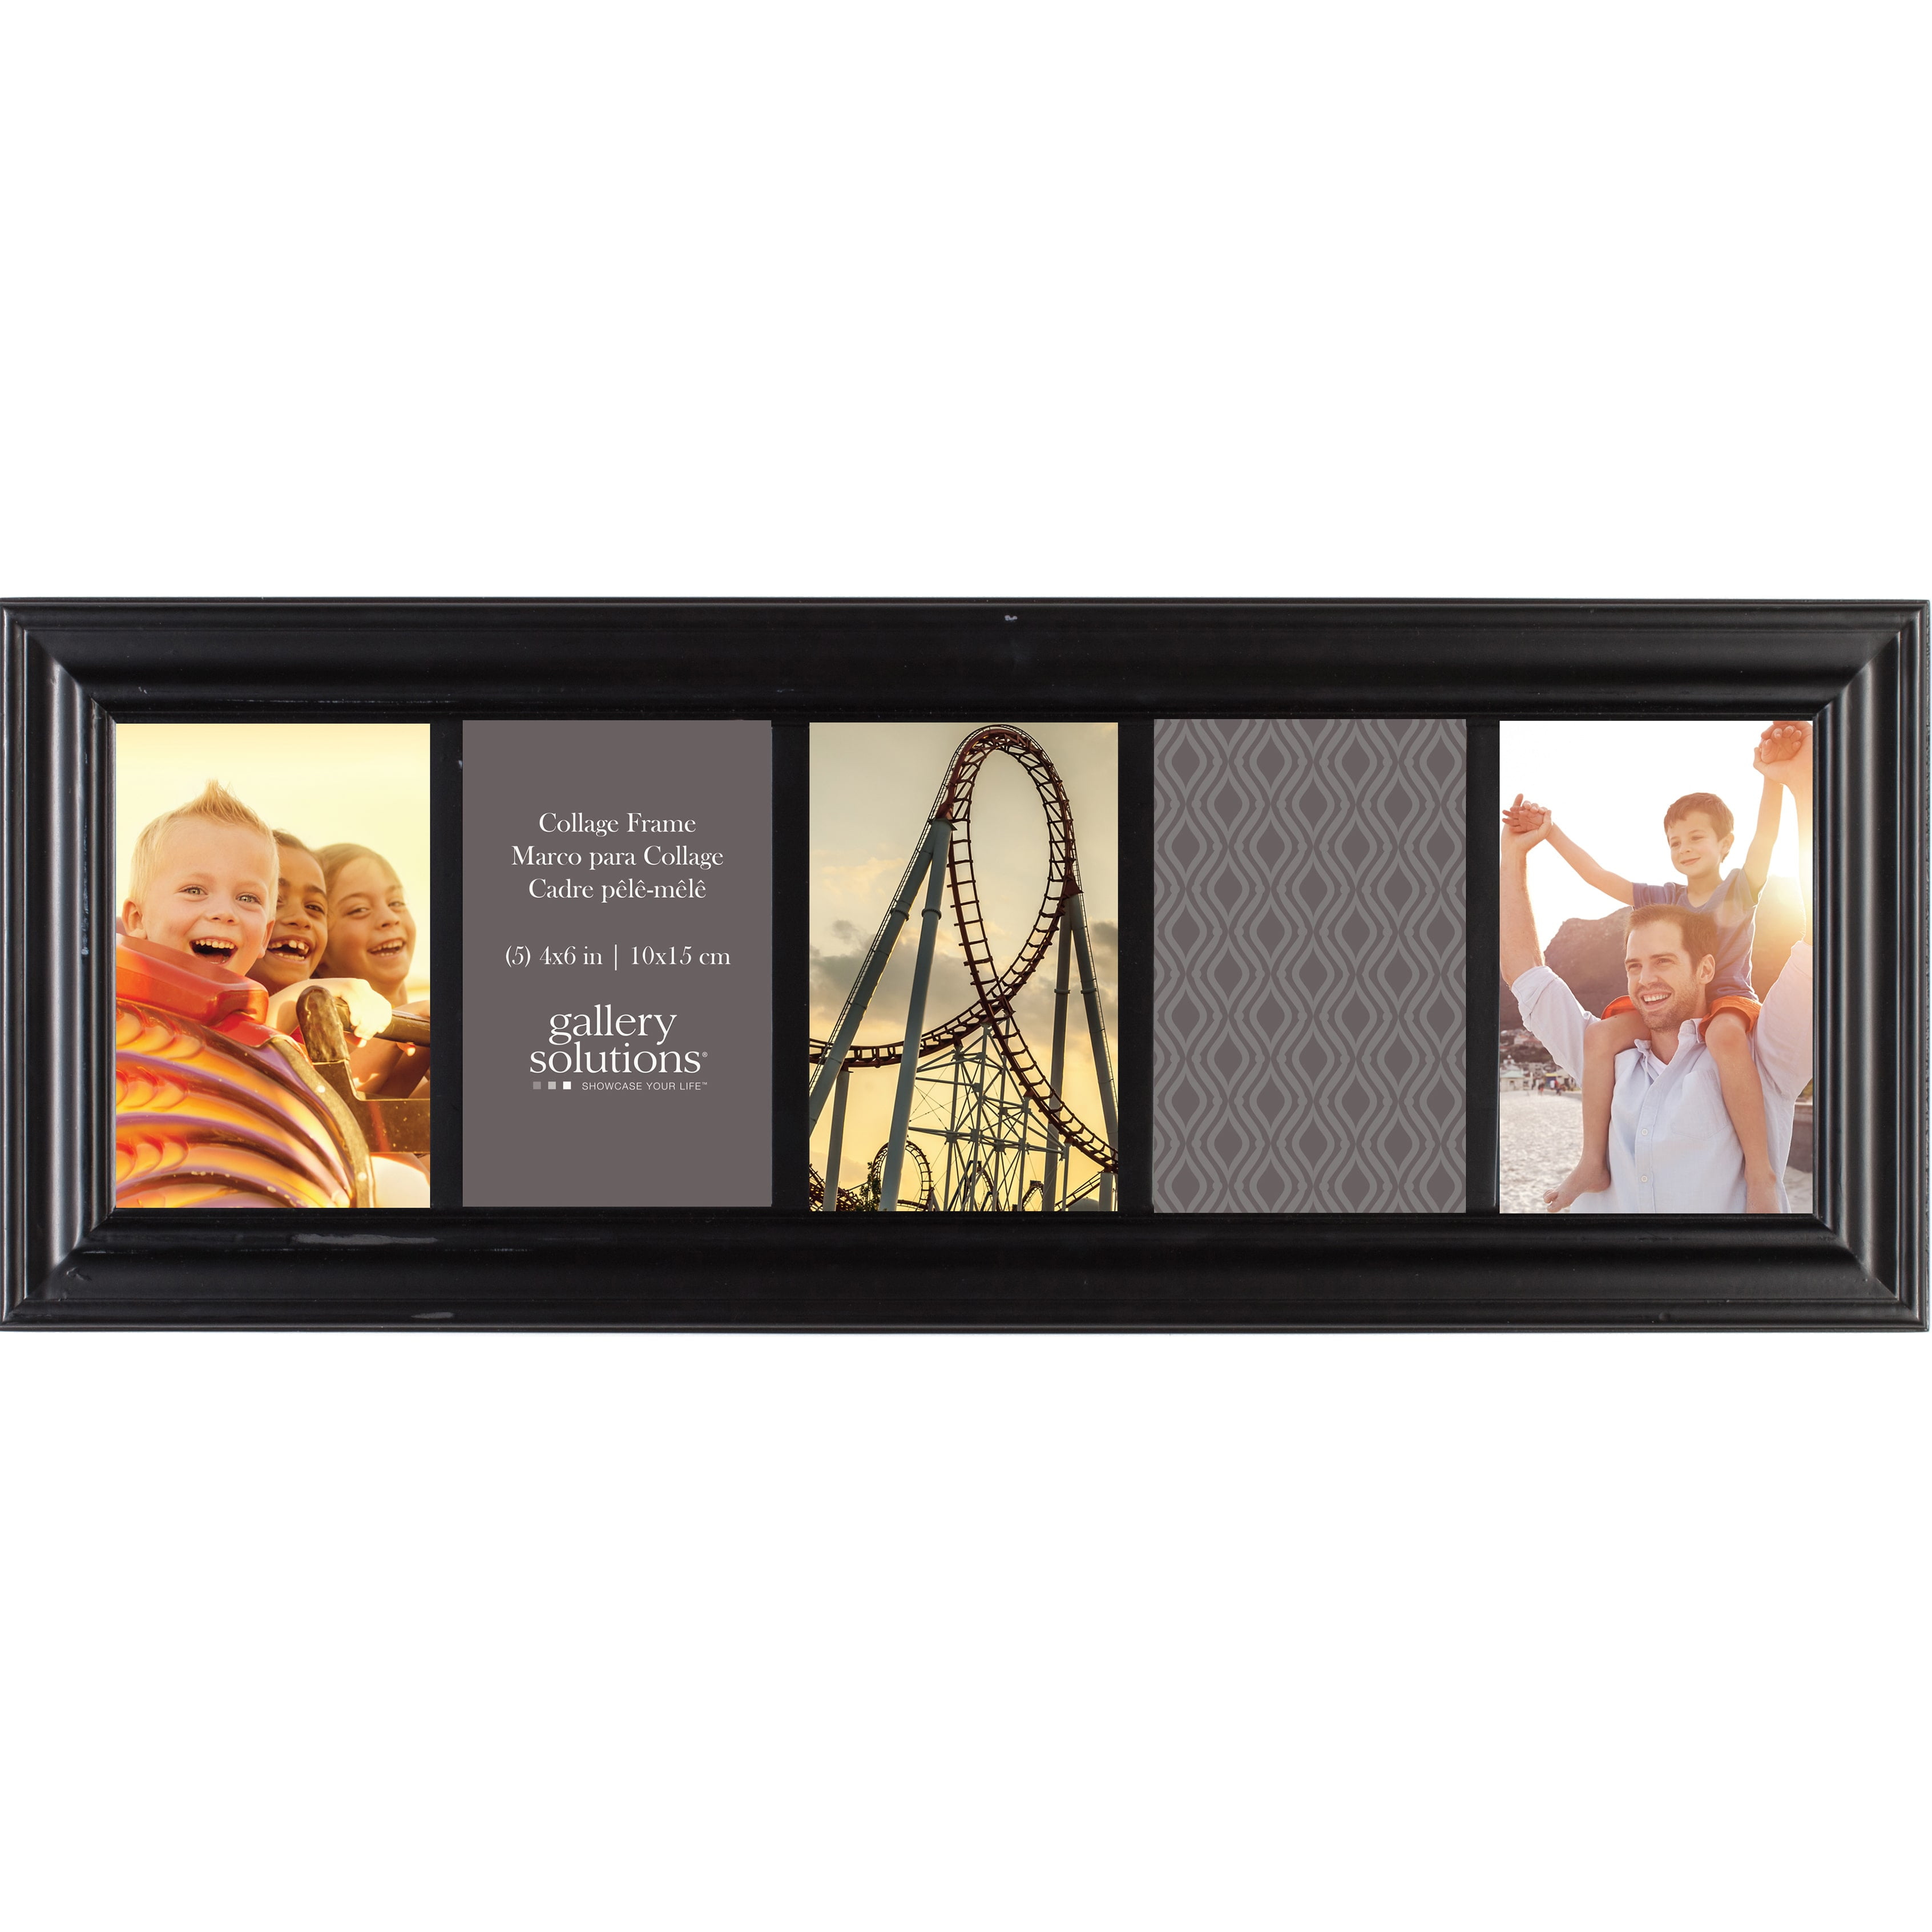 Perfect Memory Collage Photo Frame 15.5" Square Black Holds 6-4 X 6" Pictures 